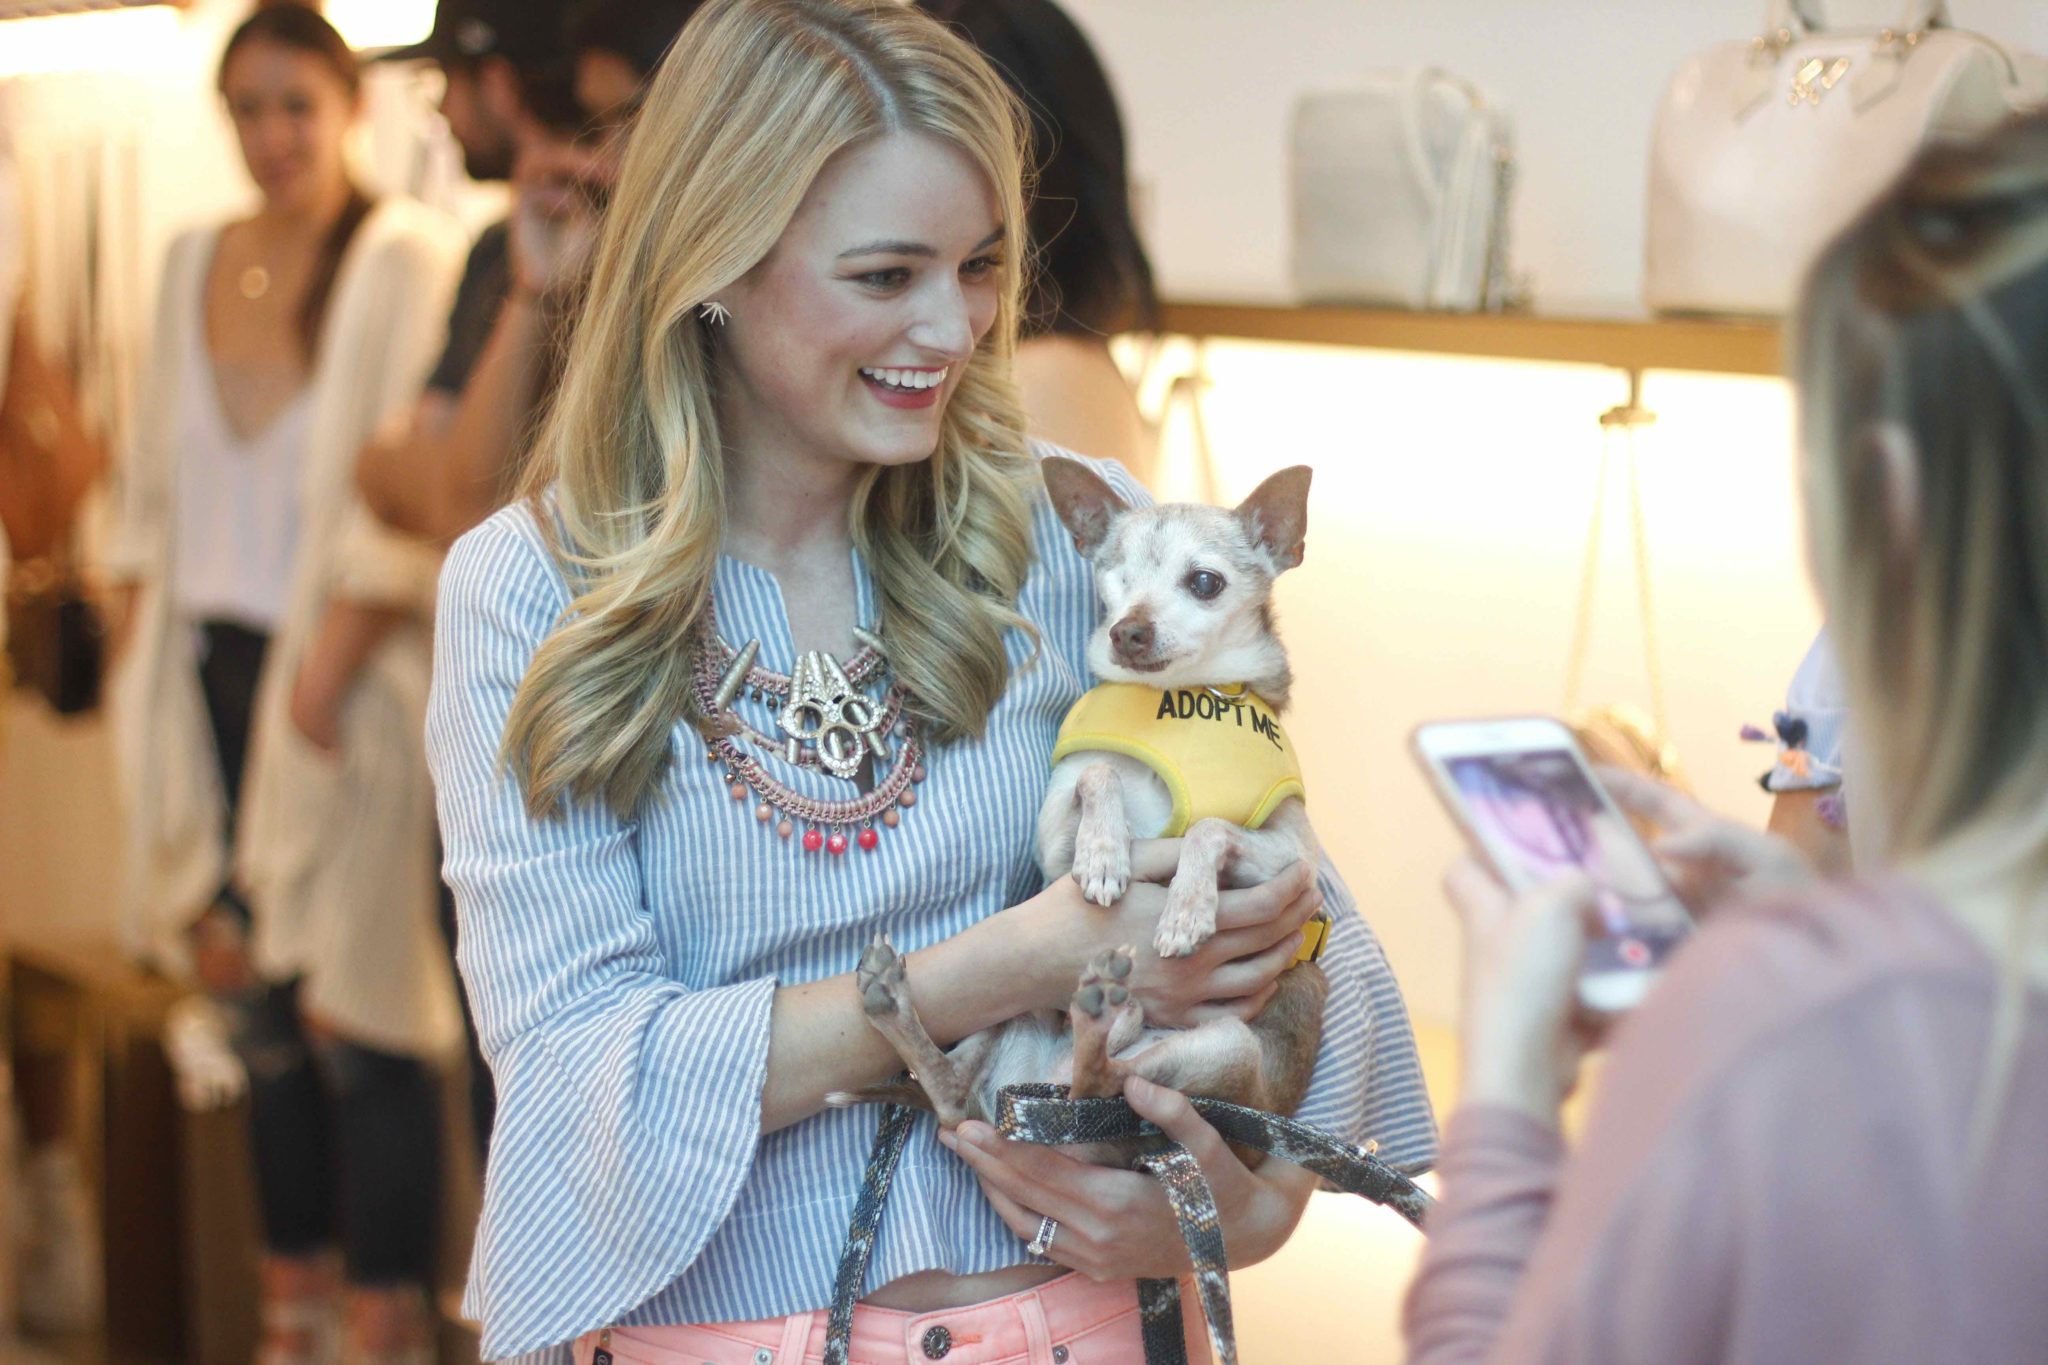 Event recap from the PAWsh Puppy Fashion Show with Kelly Wynne Handbags. Steven Jalapeño and 5 other dogs participated in the Austin Pets Alive runway way show Click for more info and pictures.